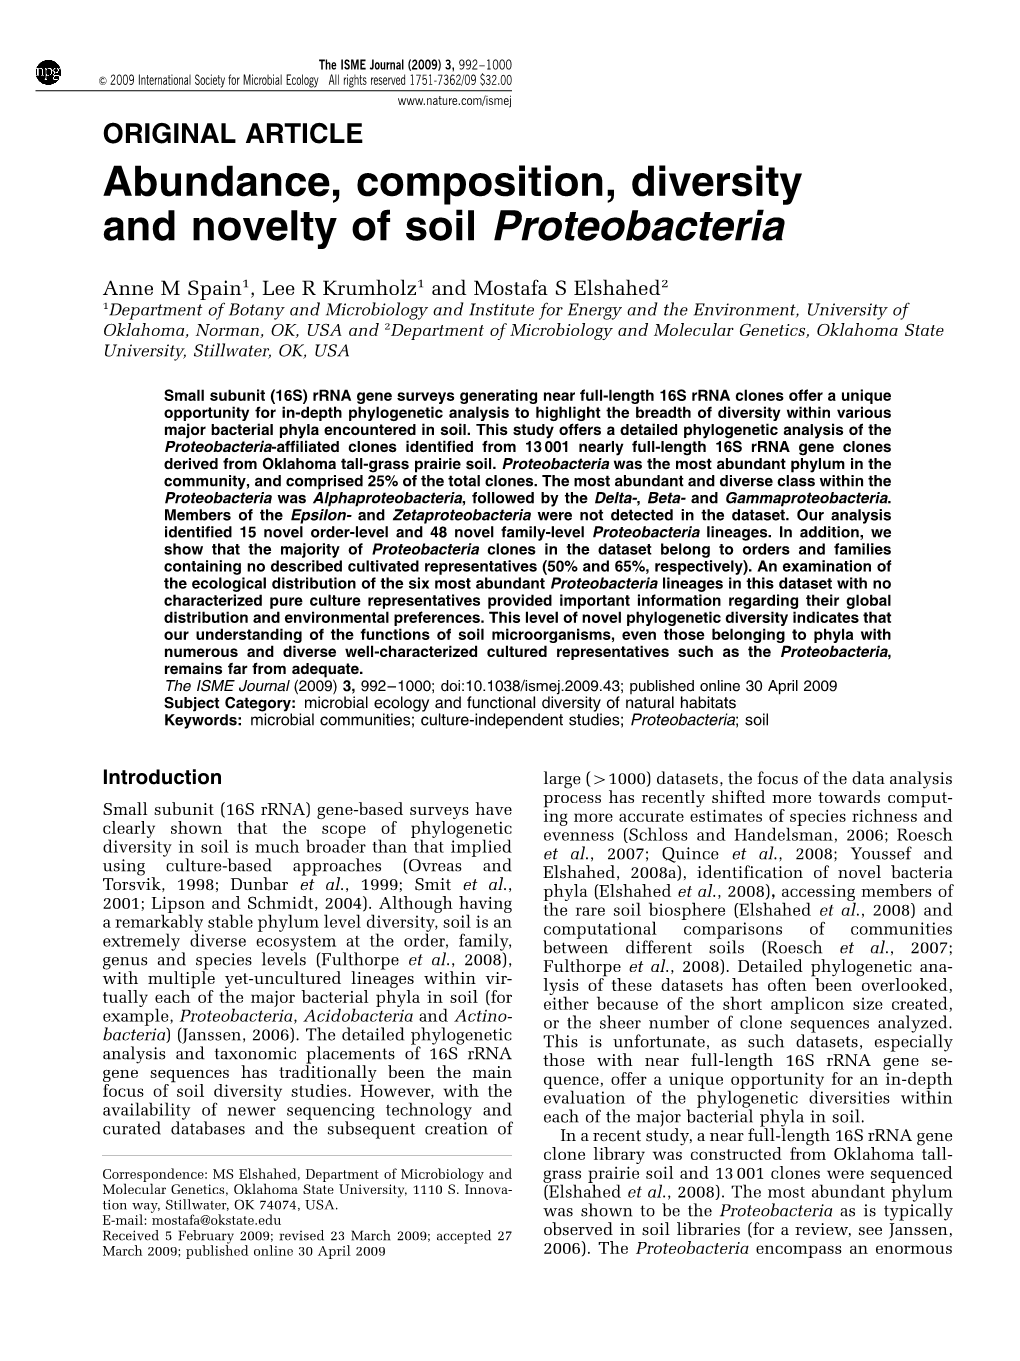 Abundance, Composition, Diversity and Novelty of Soil Proteobacteria